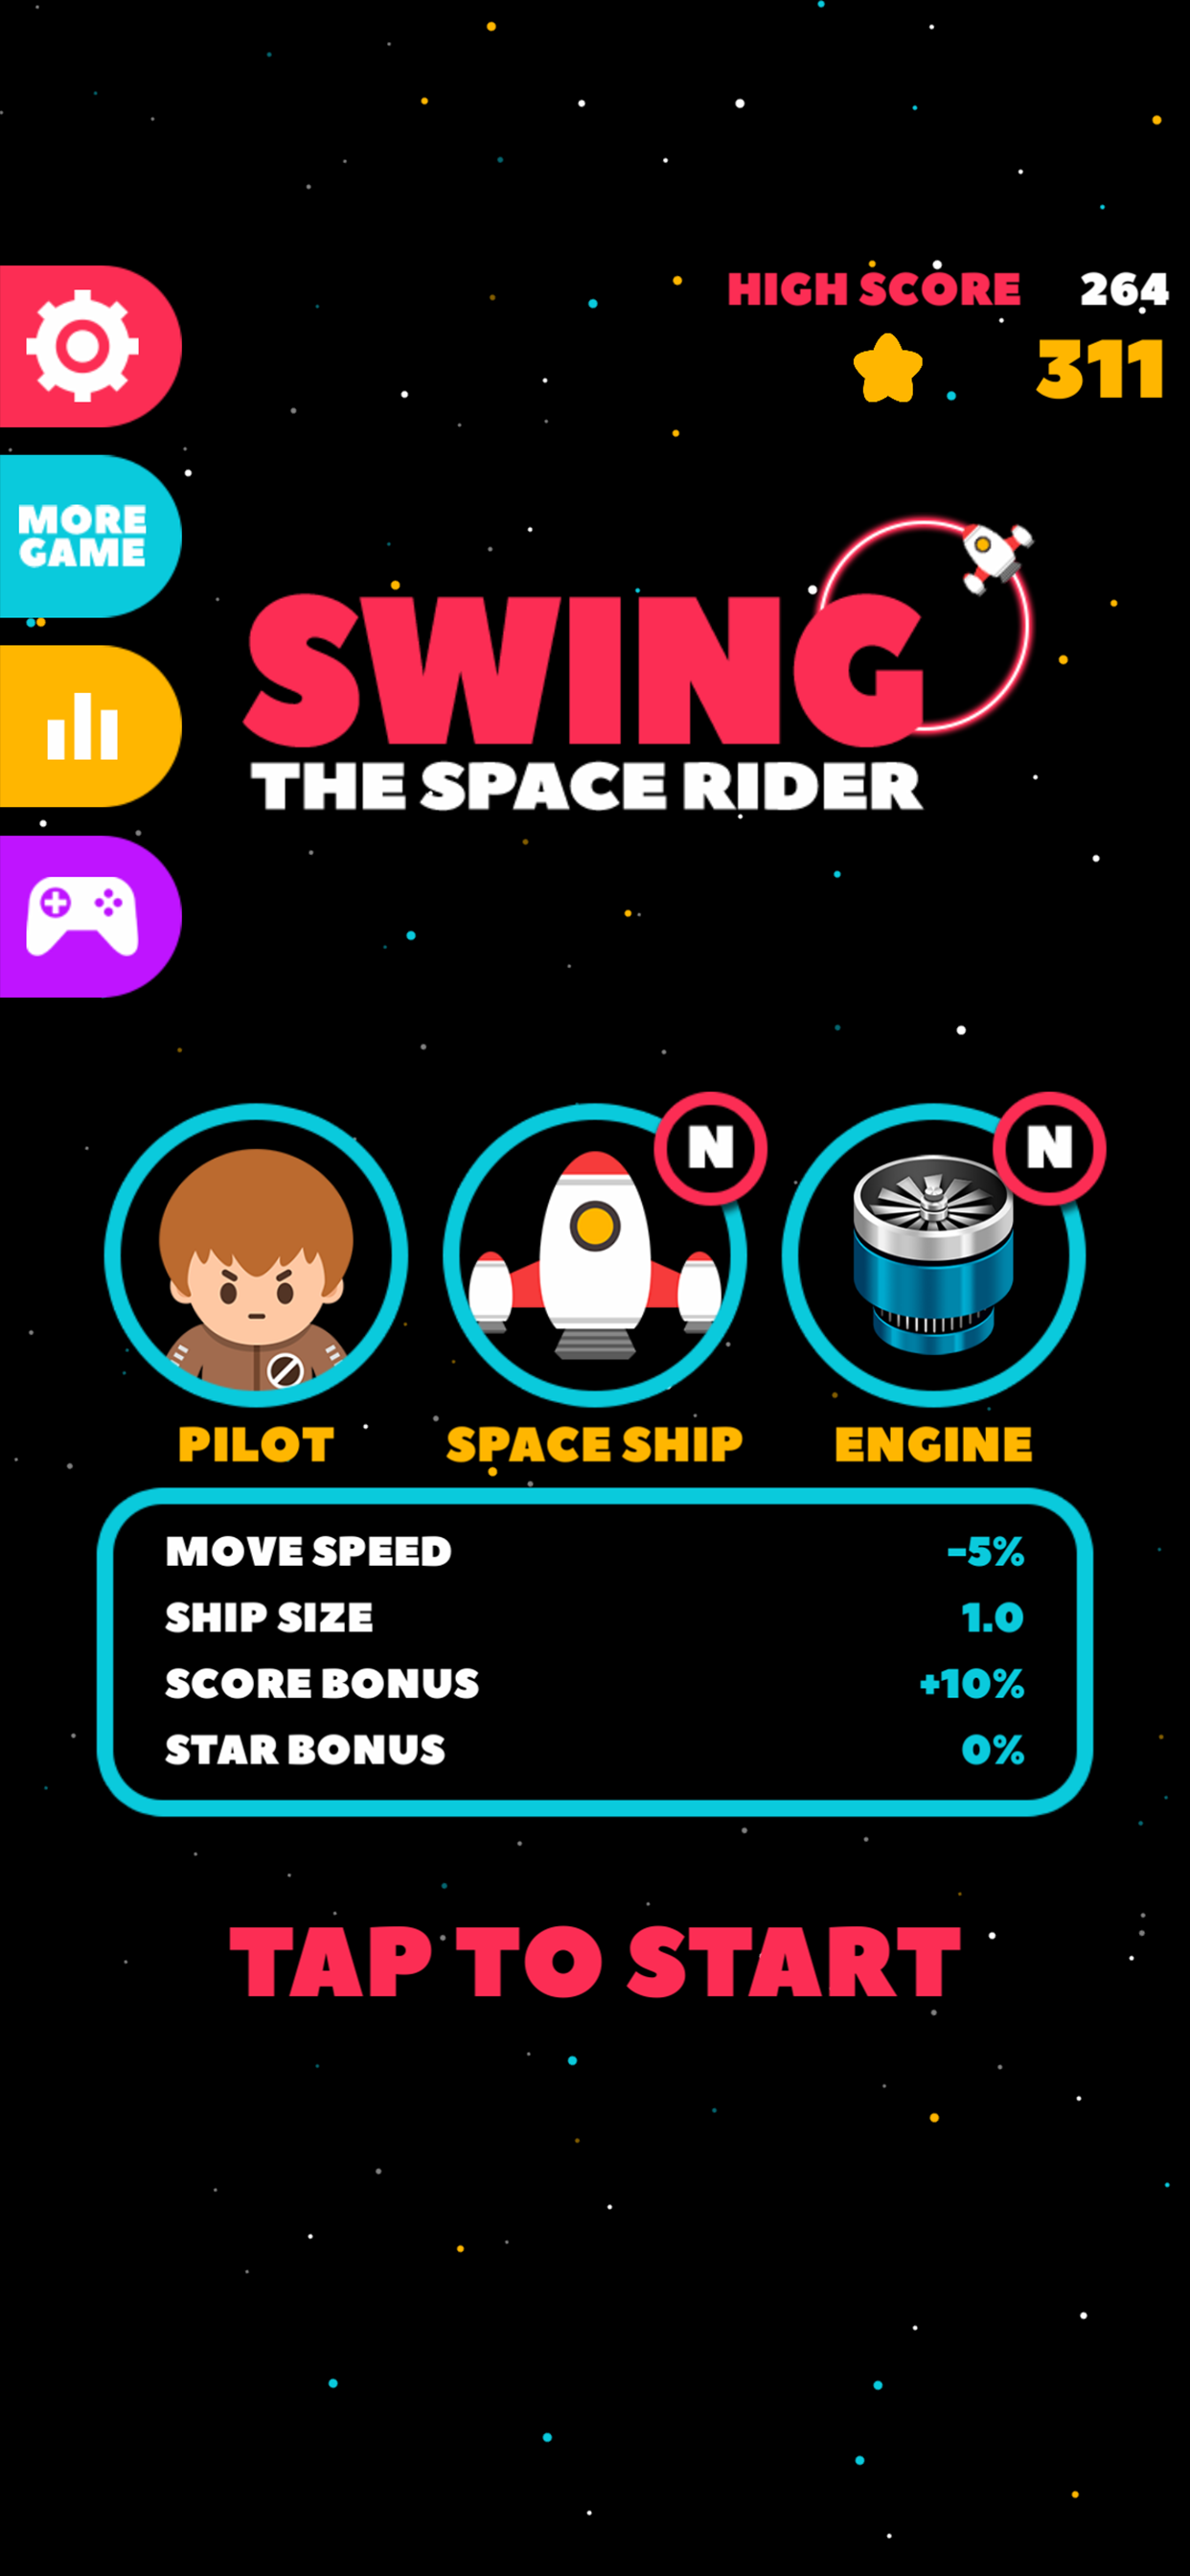 SWING：The Space Rider